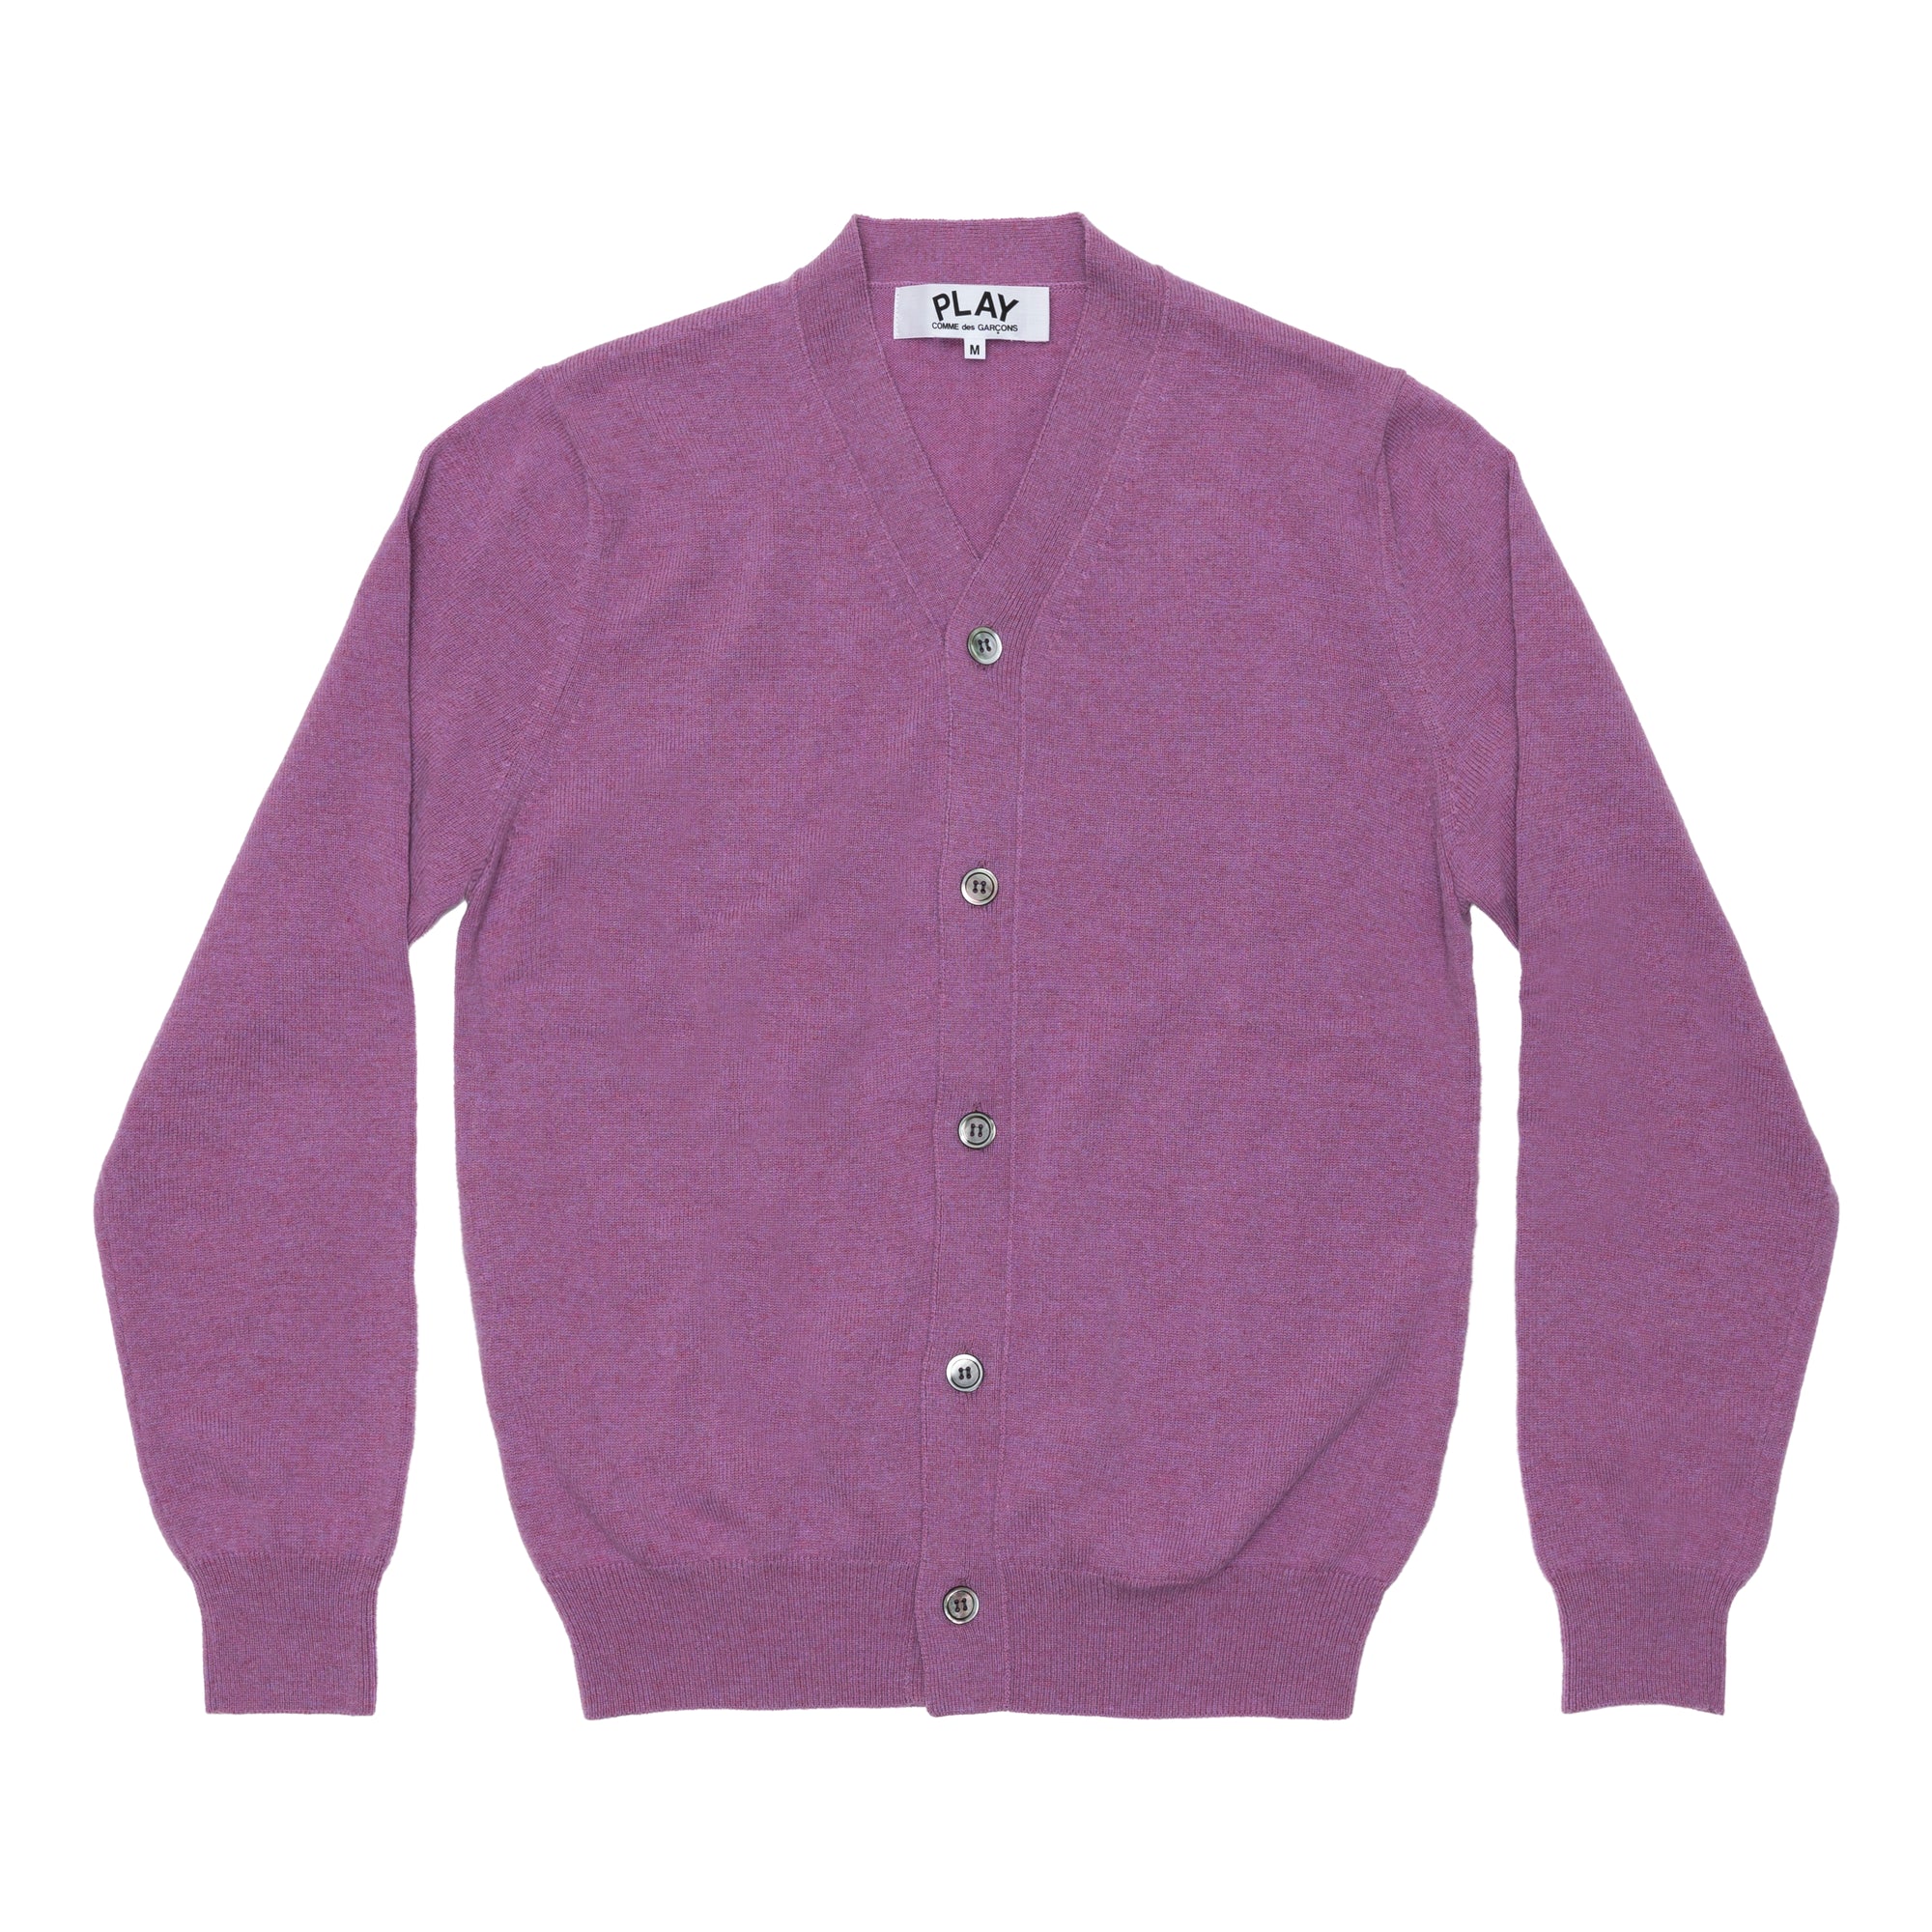 PLAY CDG  - Top Dyed Carded Lambswool Men's Cardigan - (Purple) view 1